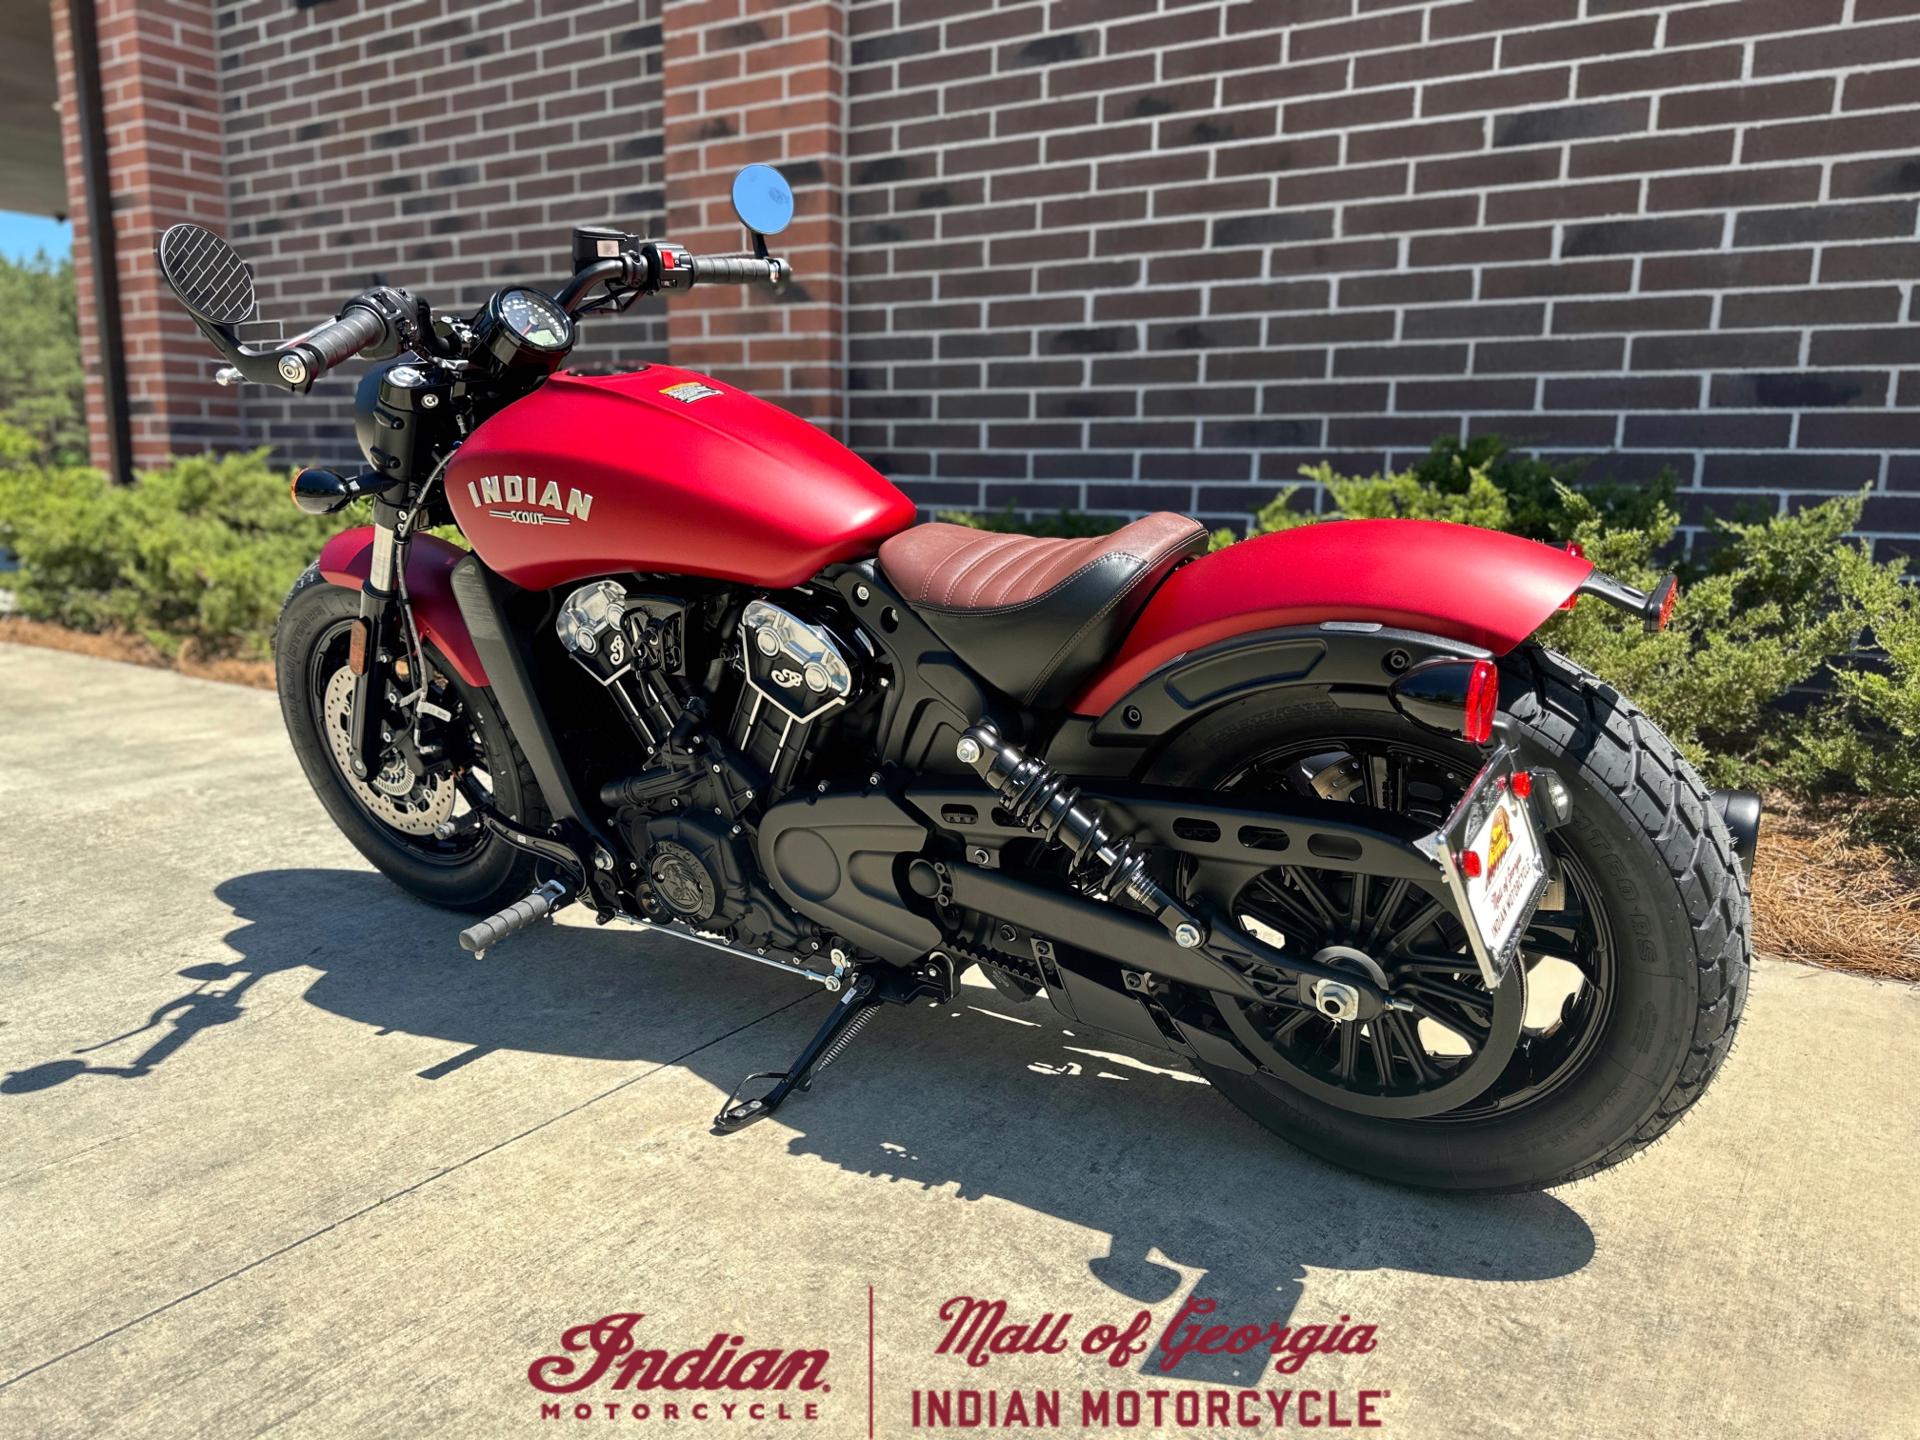 2023 Indian Motorcycle Scout® Bobber ABS in Buford, Georgia - Photo 6